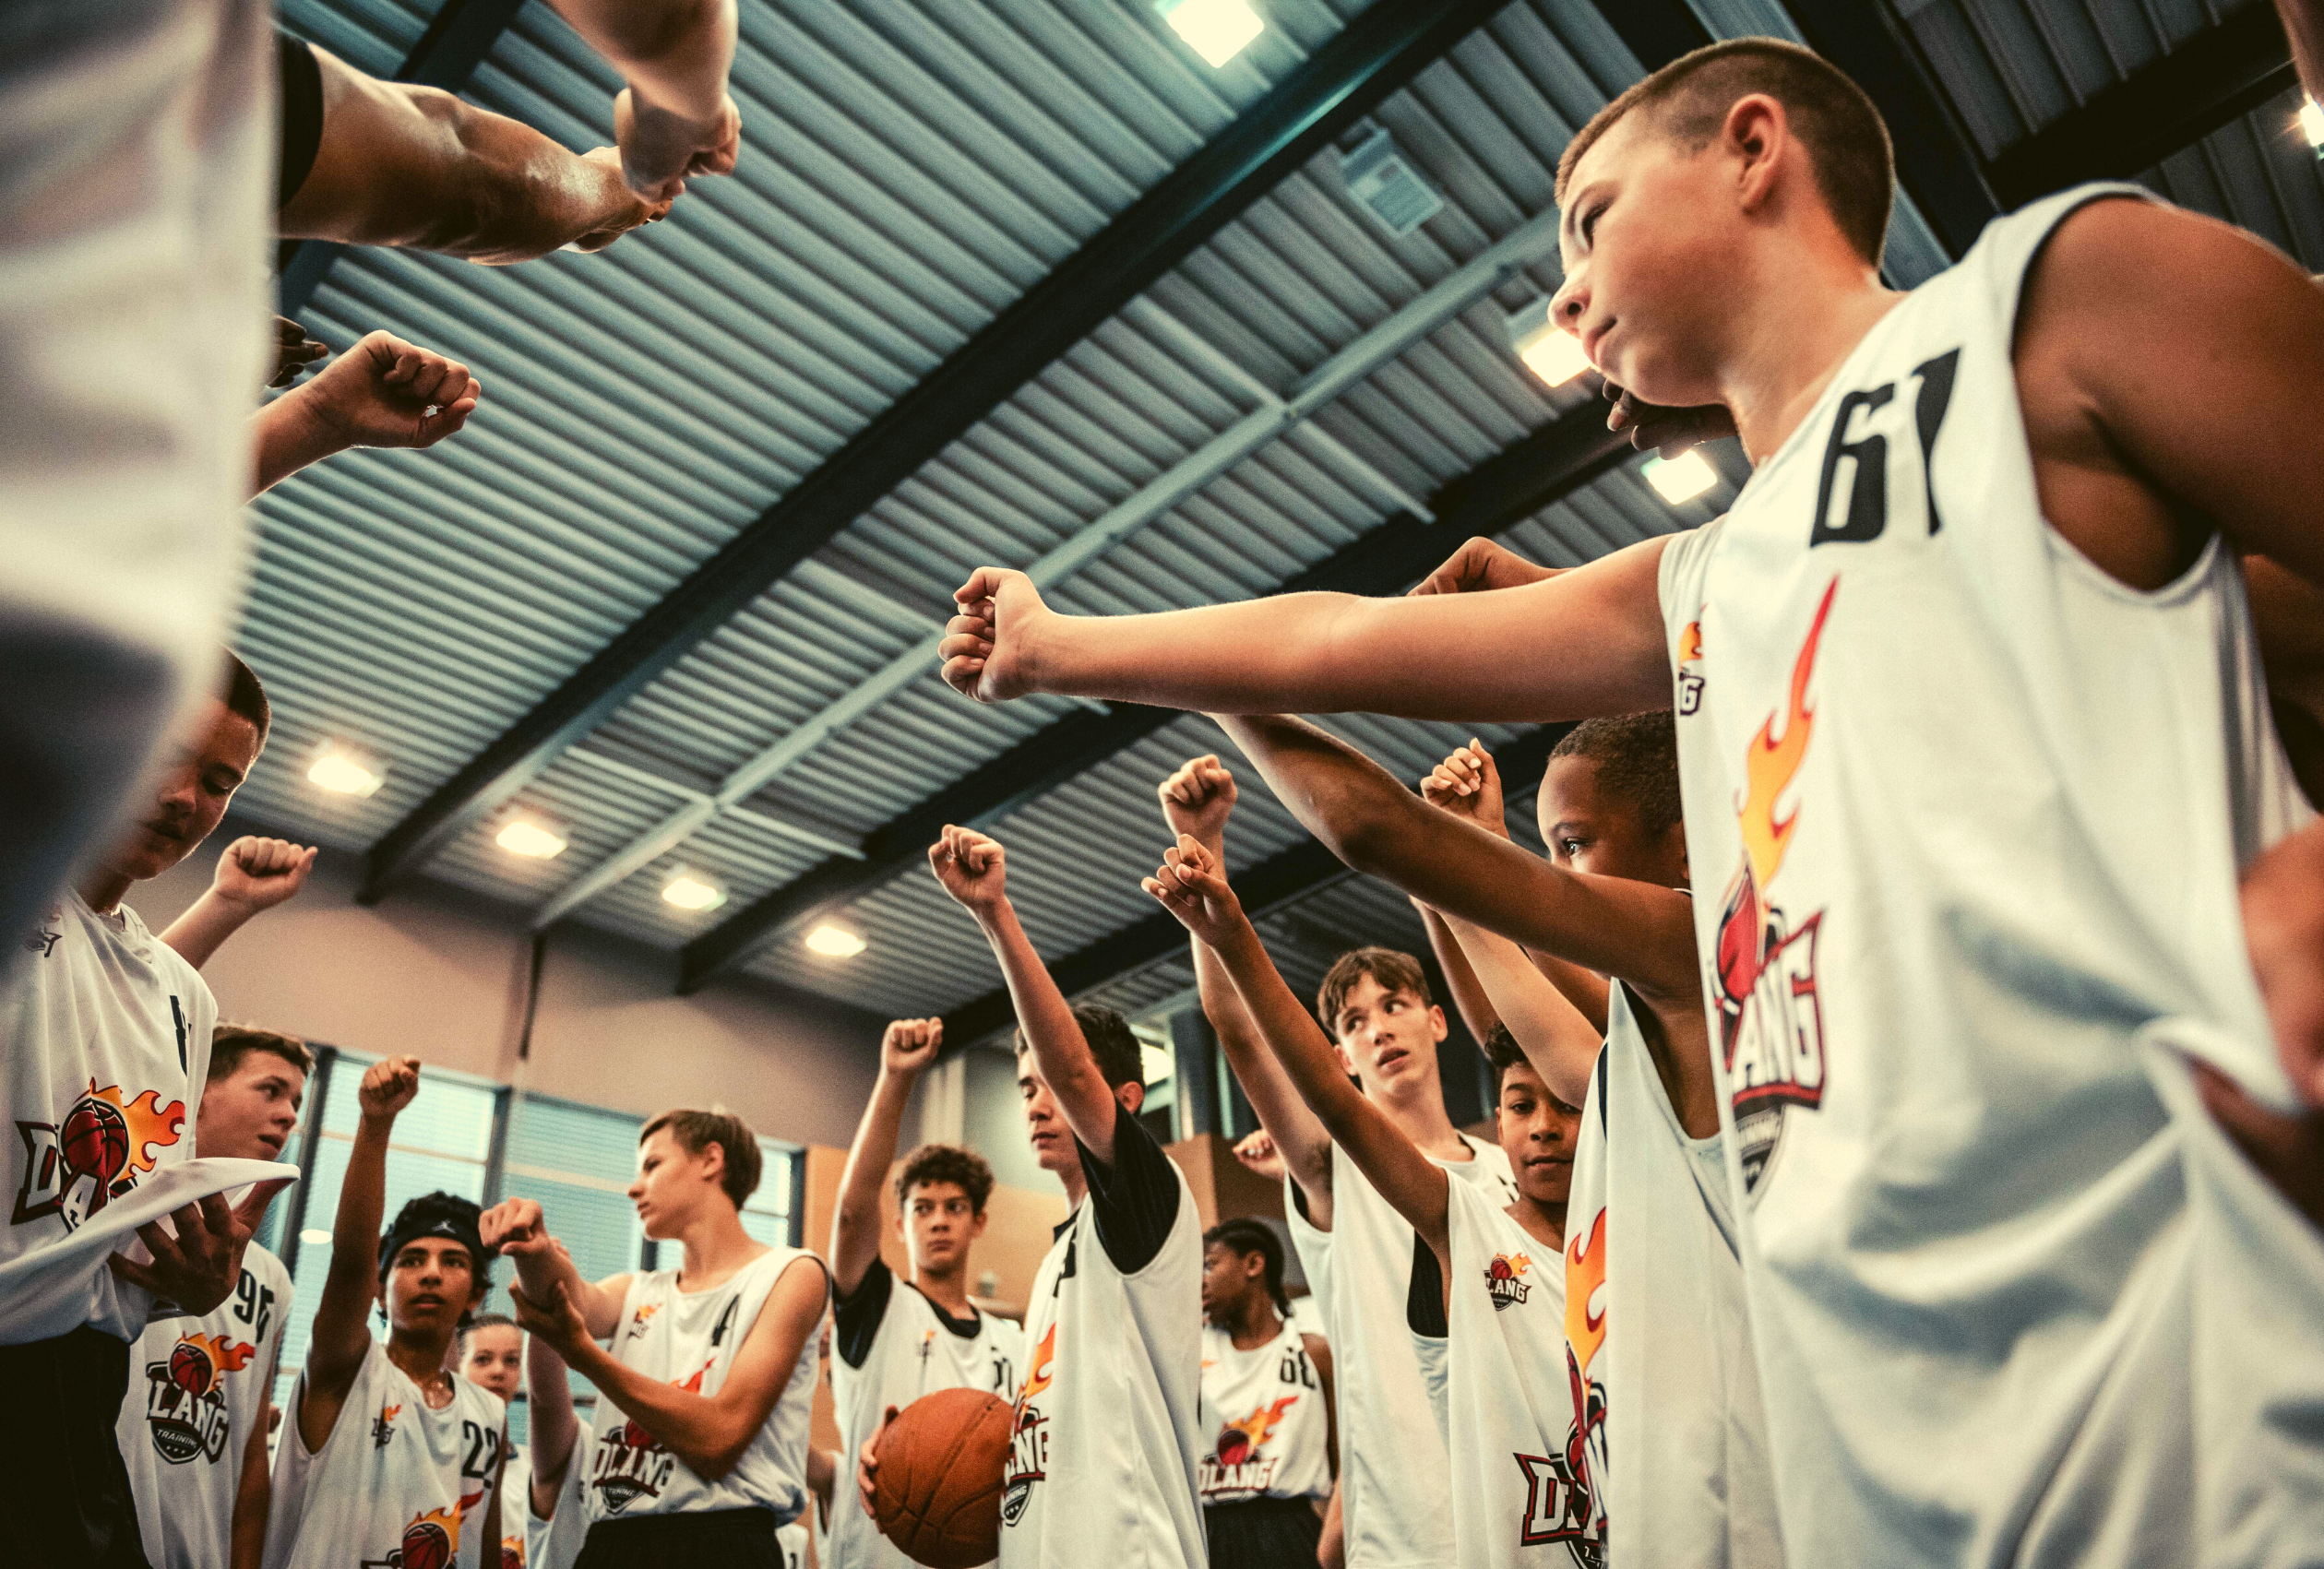 Junior Camp - Basketball and Multi-Activity, 9 to 12 years old